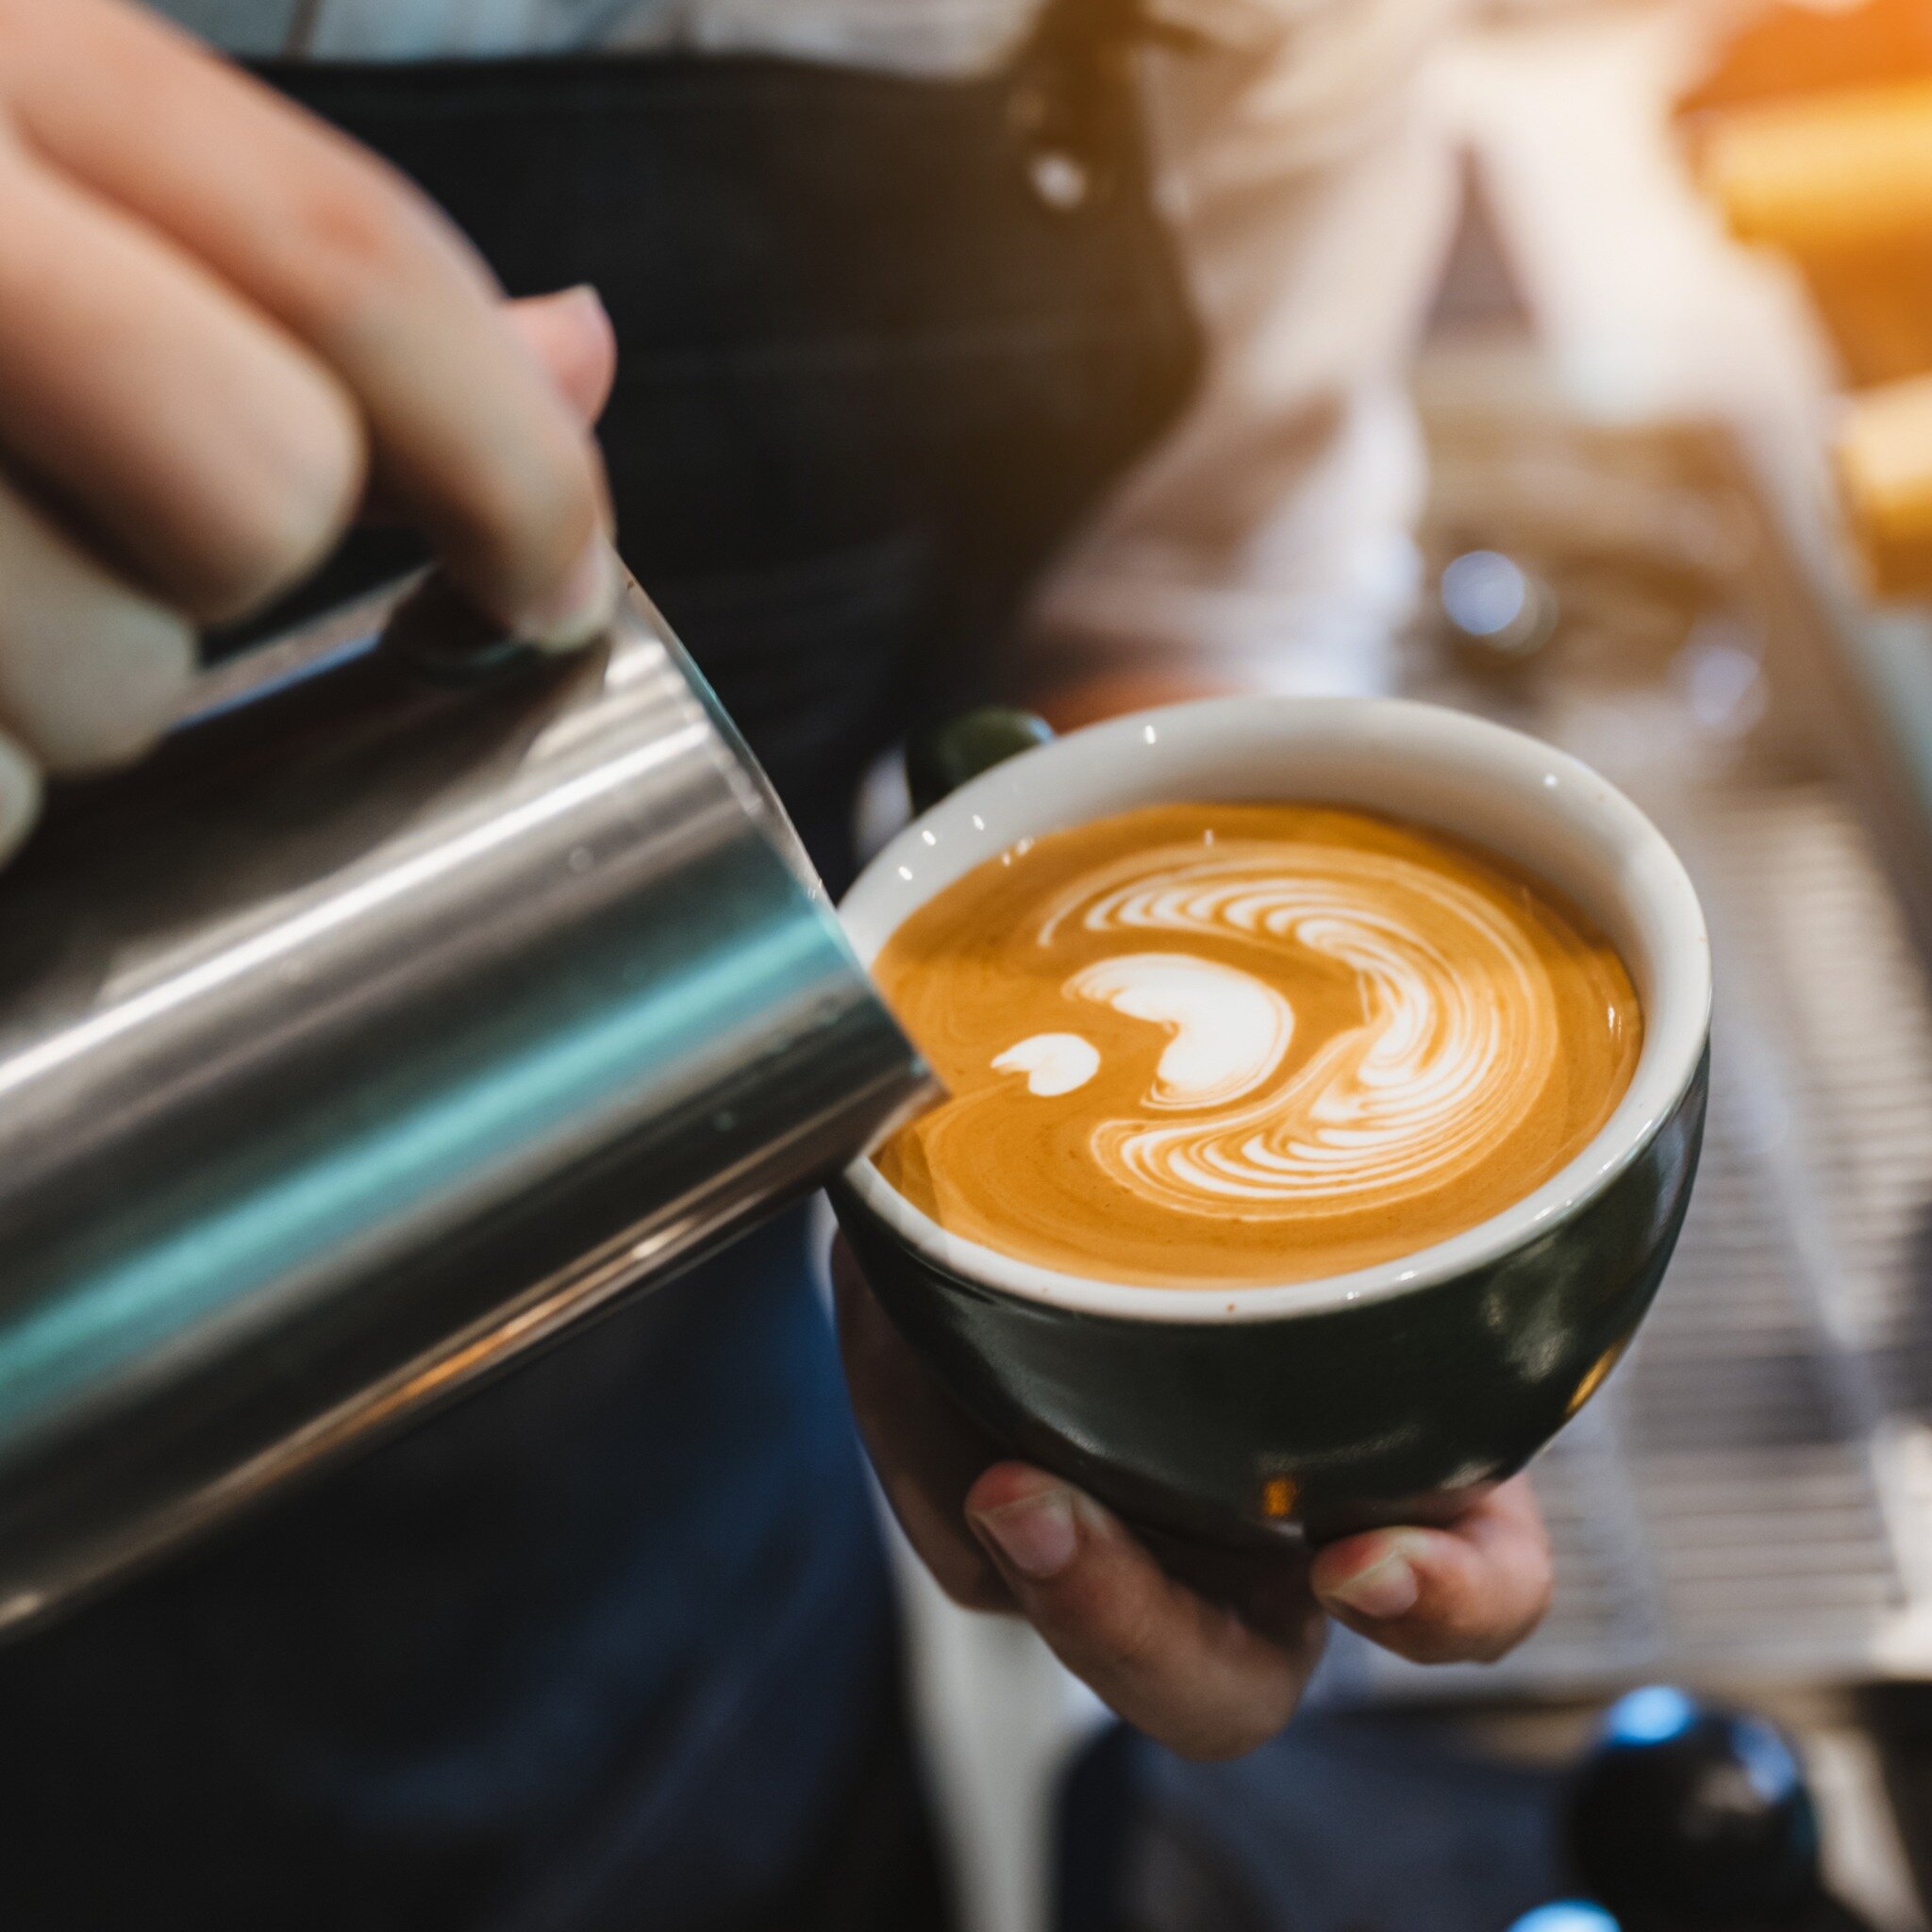 Experience the distinctive taste of our single-origin specialty coffee (SCA score of 87-88), each cup a canvas of latte art meticulously crafted by our passionate, qualified baristas. It's not just coffee, it's an ode to the bean, the craft, and the 